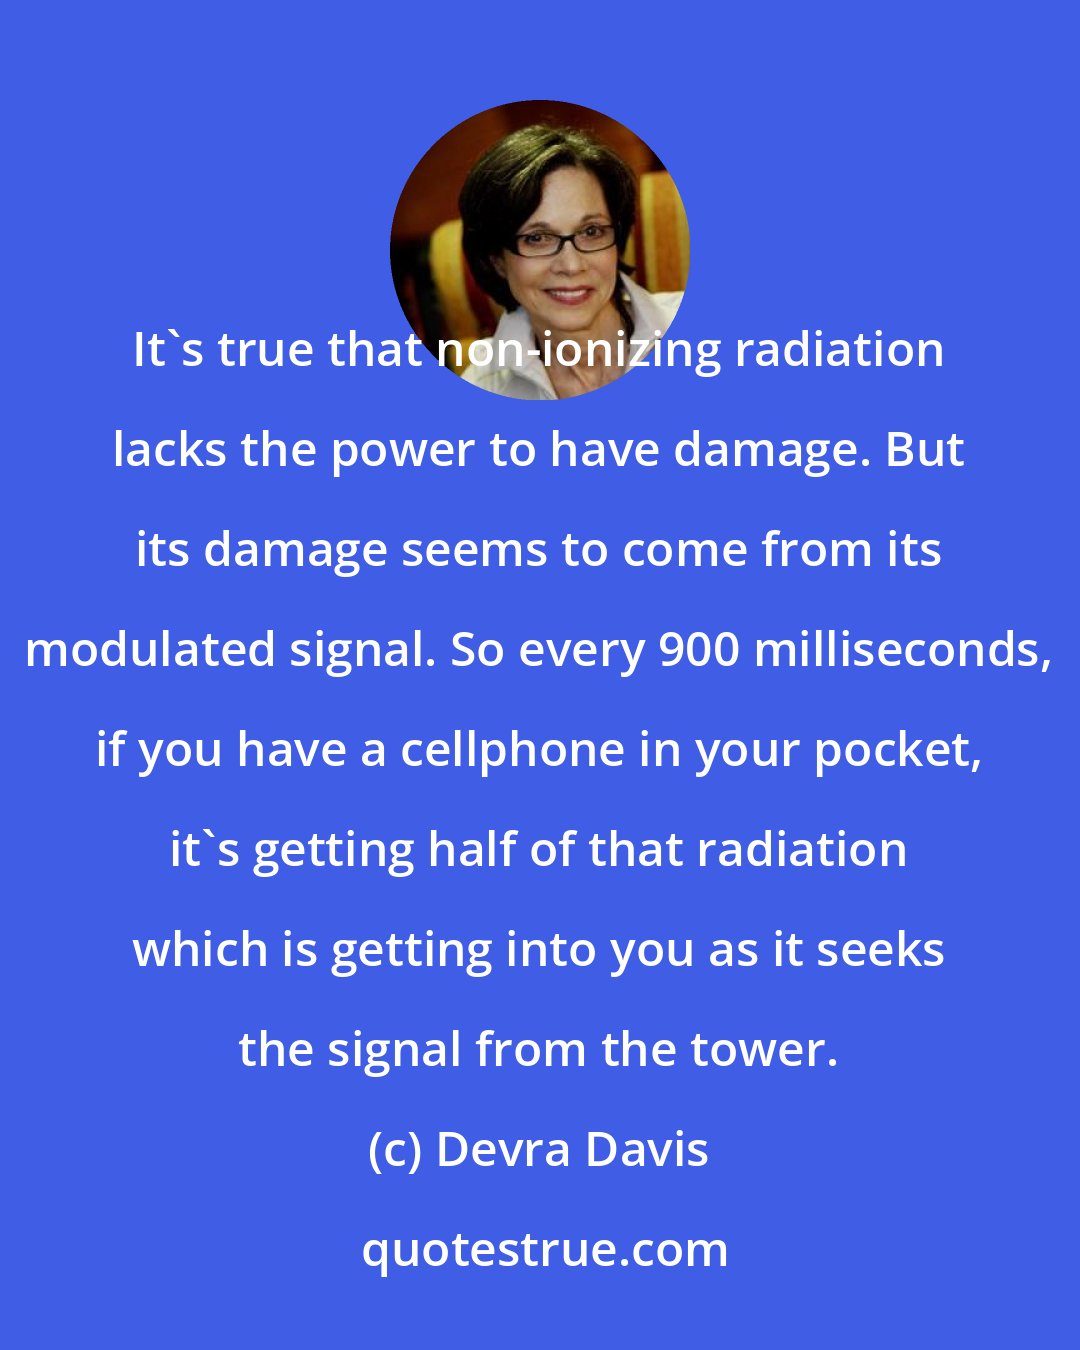 Devra Davis: It's true that non-ionizing radiation lacks the power to have damage. But its damage seems to come from its modulated signal. So every 900 milliseconds, if you have a cellphone in your pocket, it's getting half of that radiation which is getting into you as it seeks the signal from the tower.